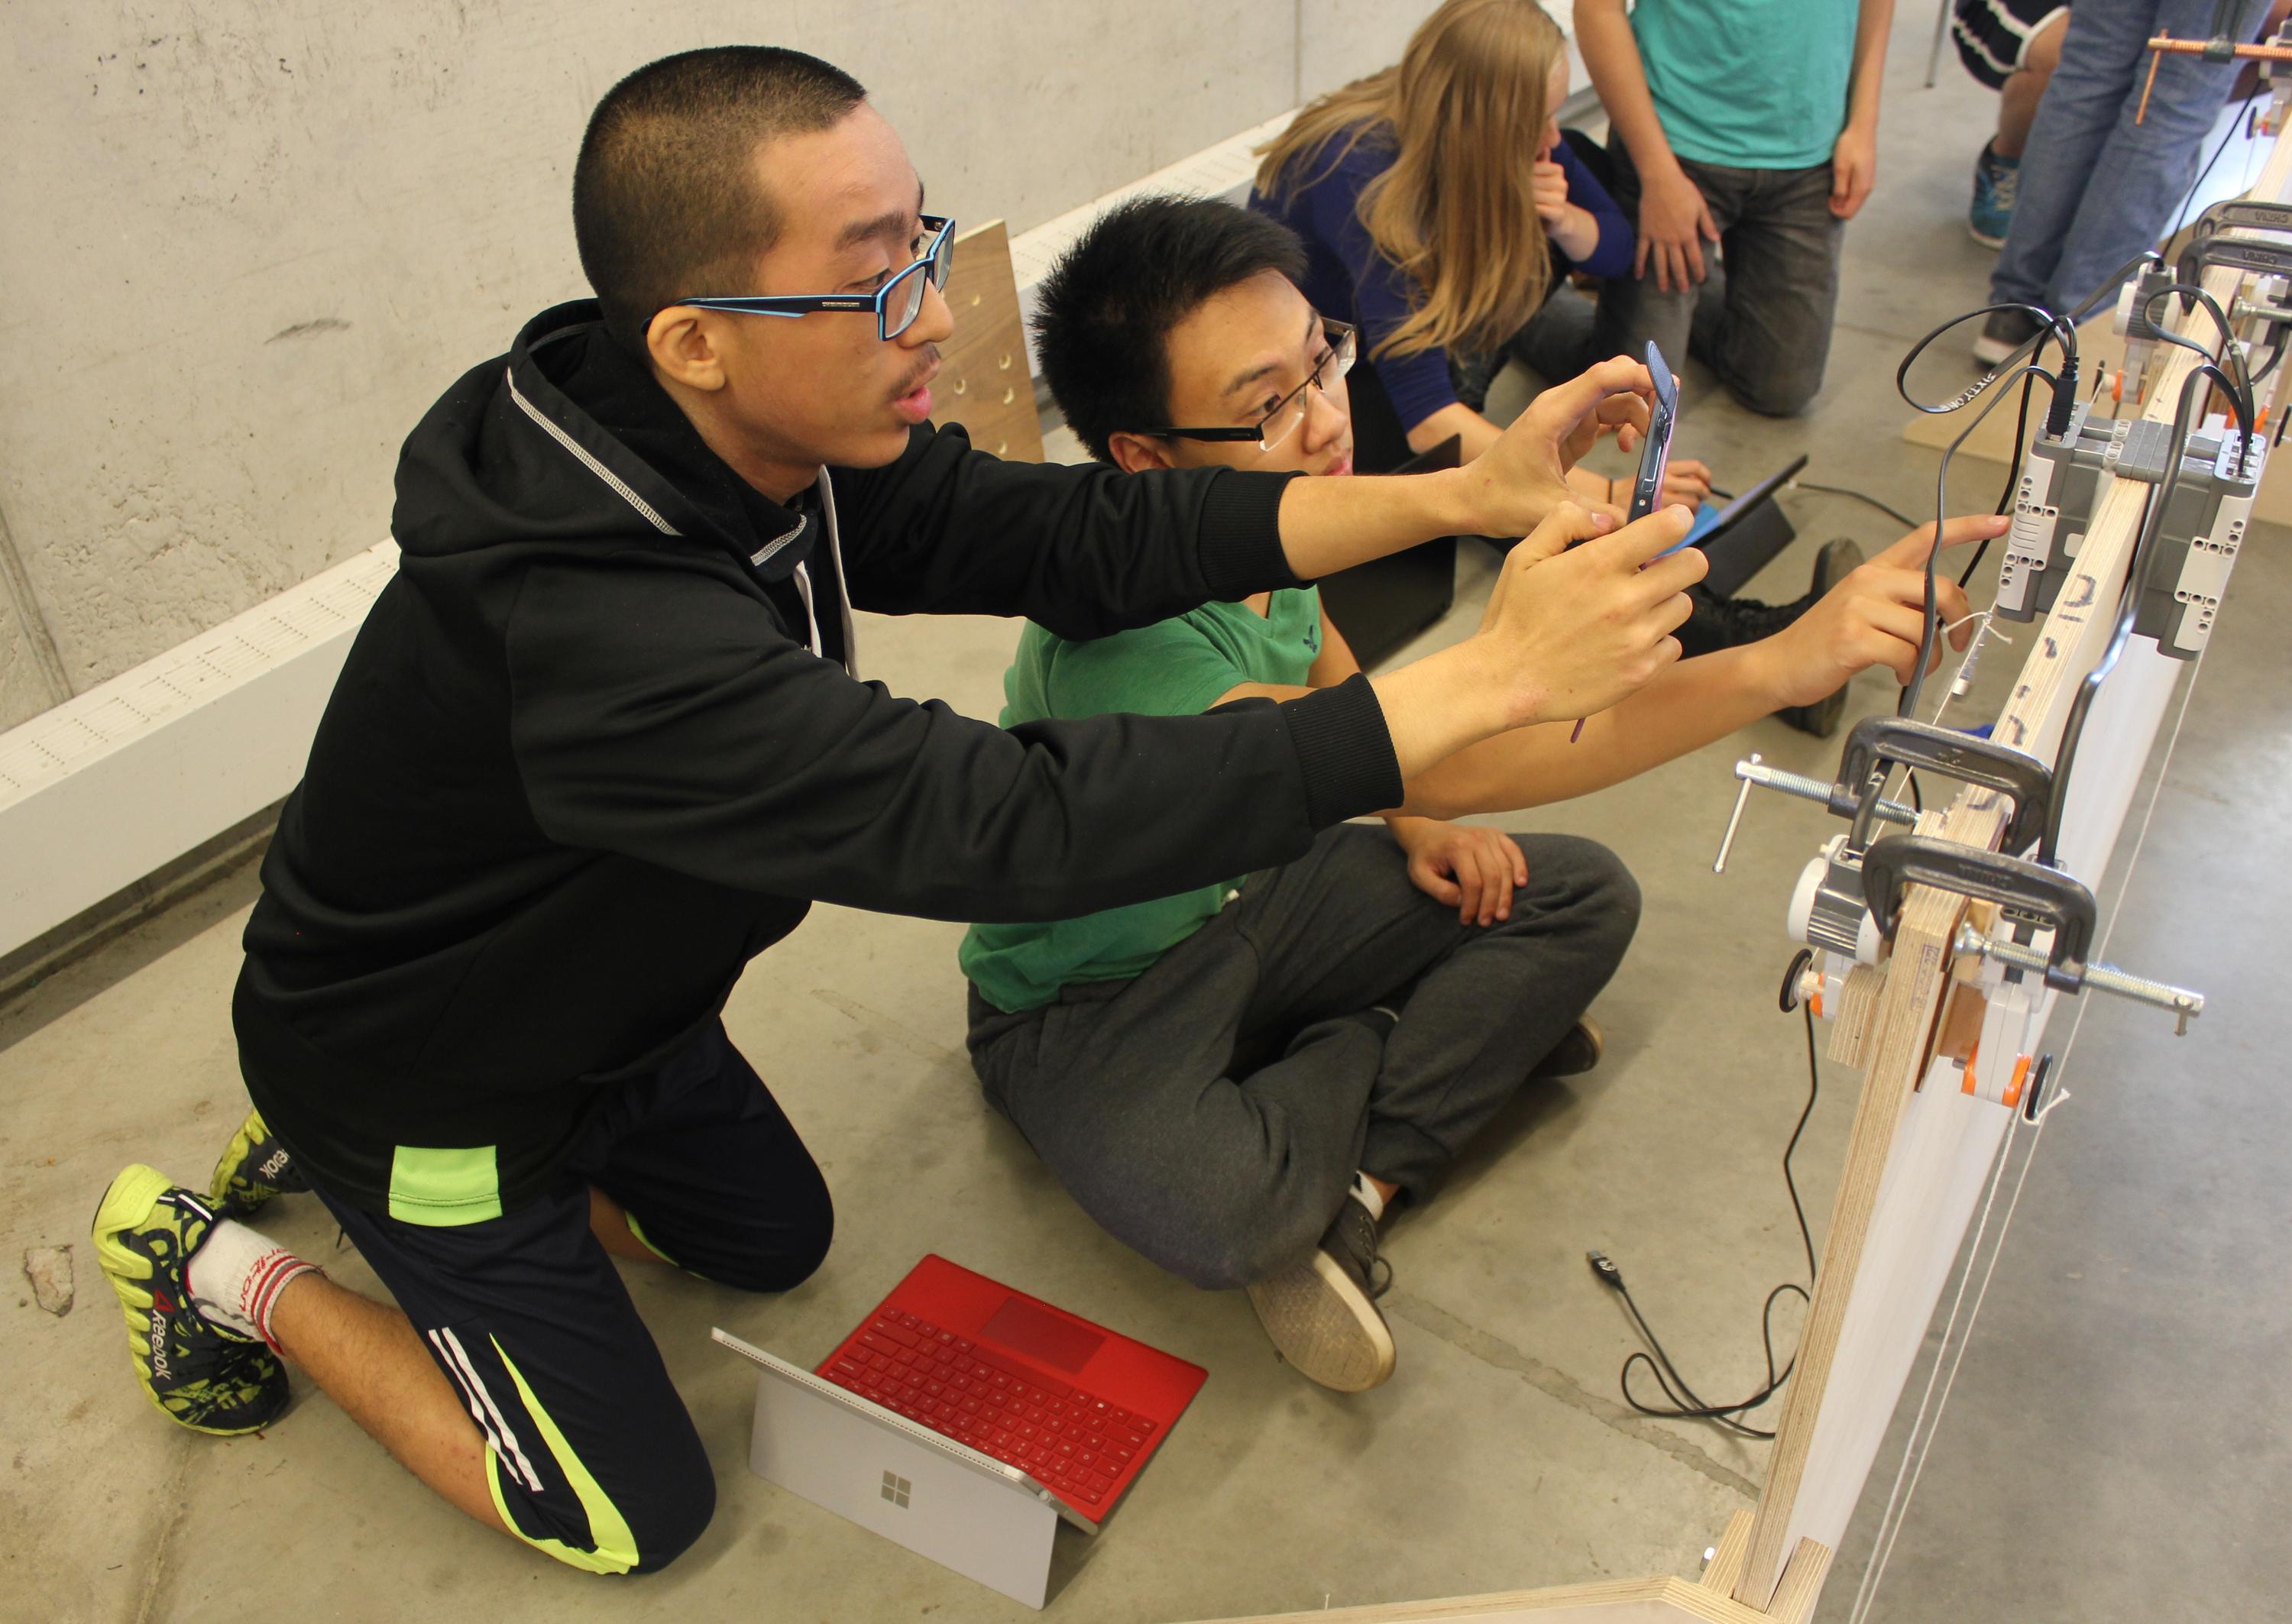 Ken Jen Lee and Eric Chee work on their project during an event for first-year mechatronics engineering students.